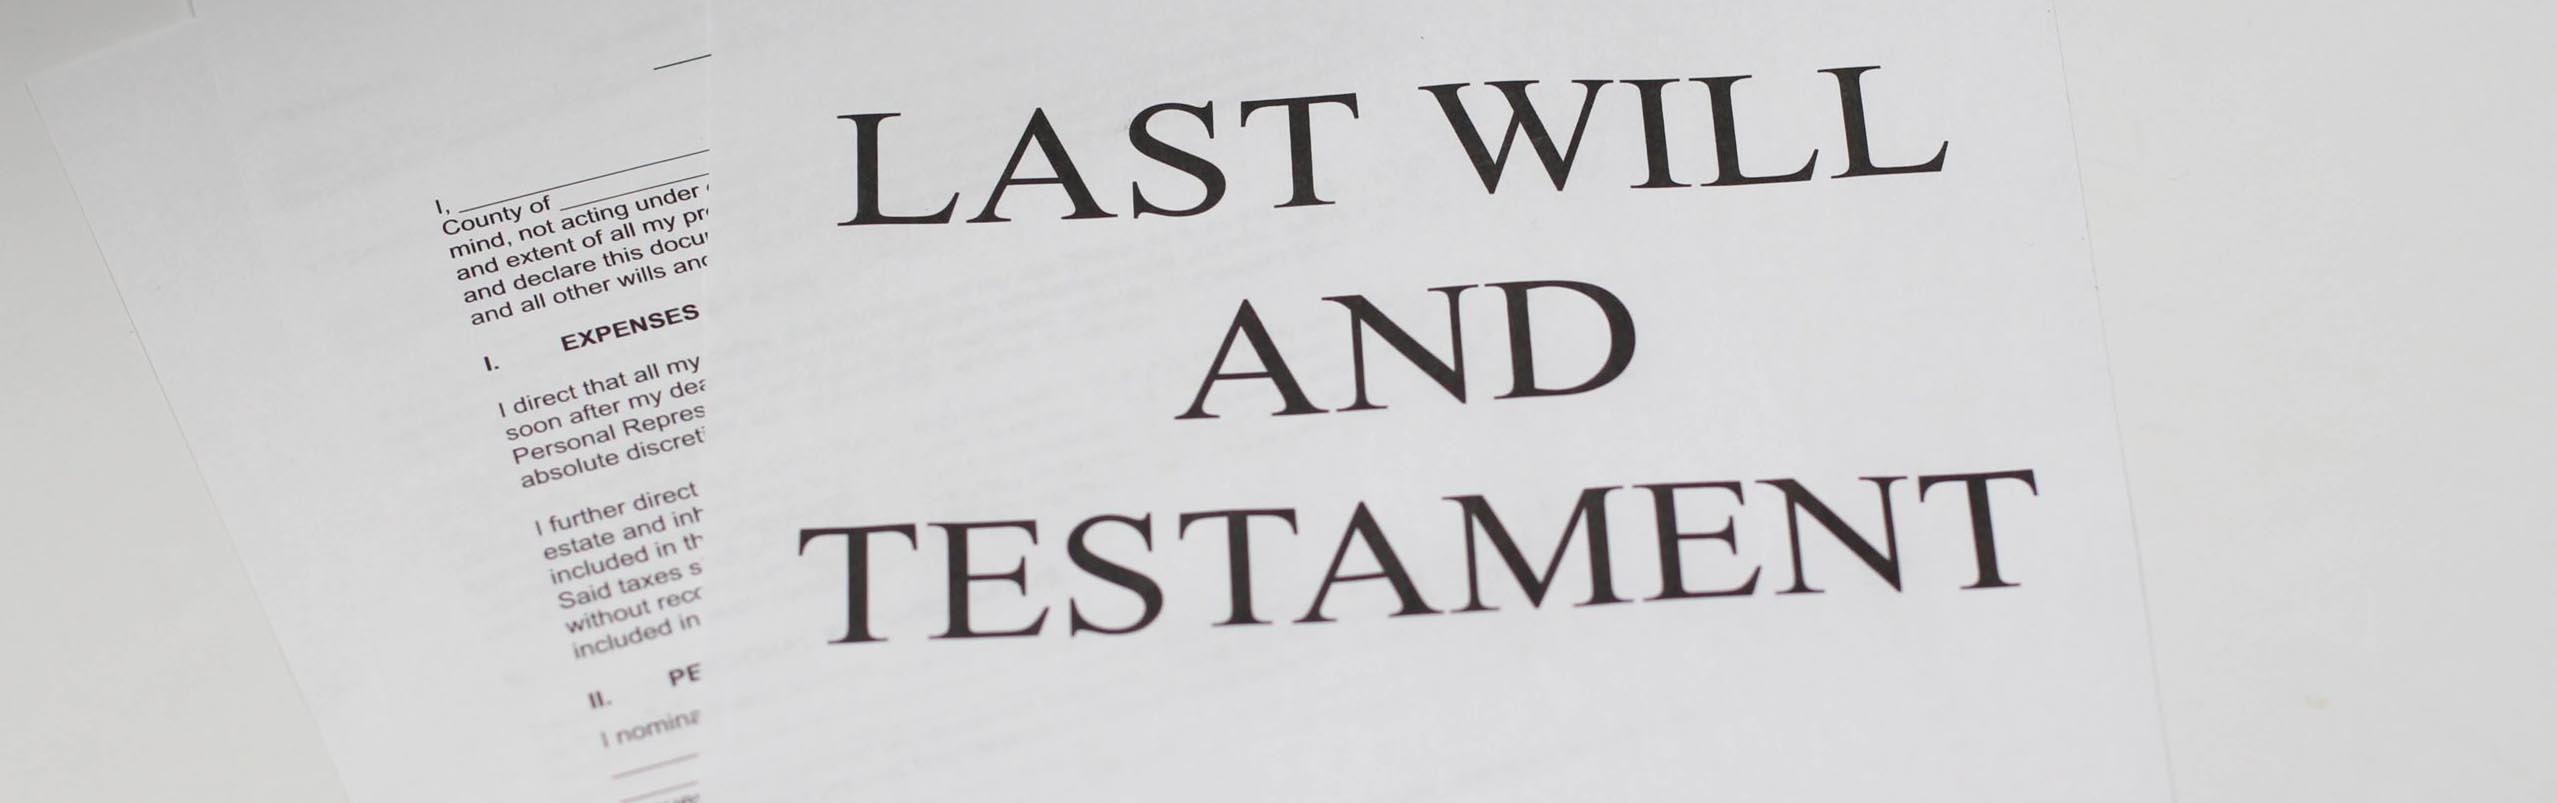 photo of last will and testament documents